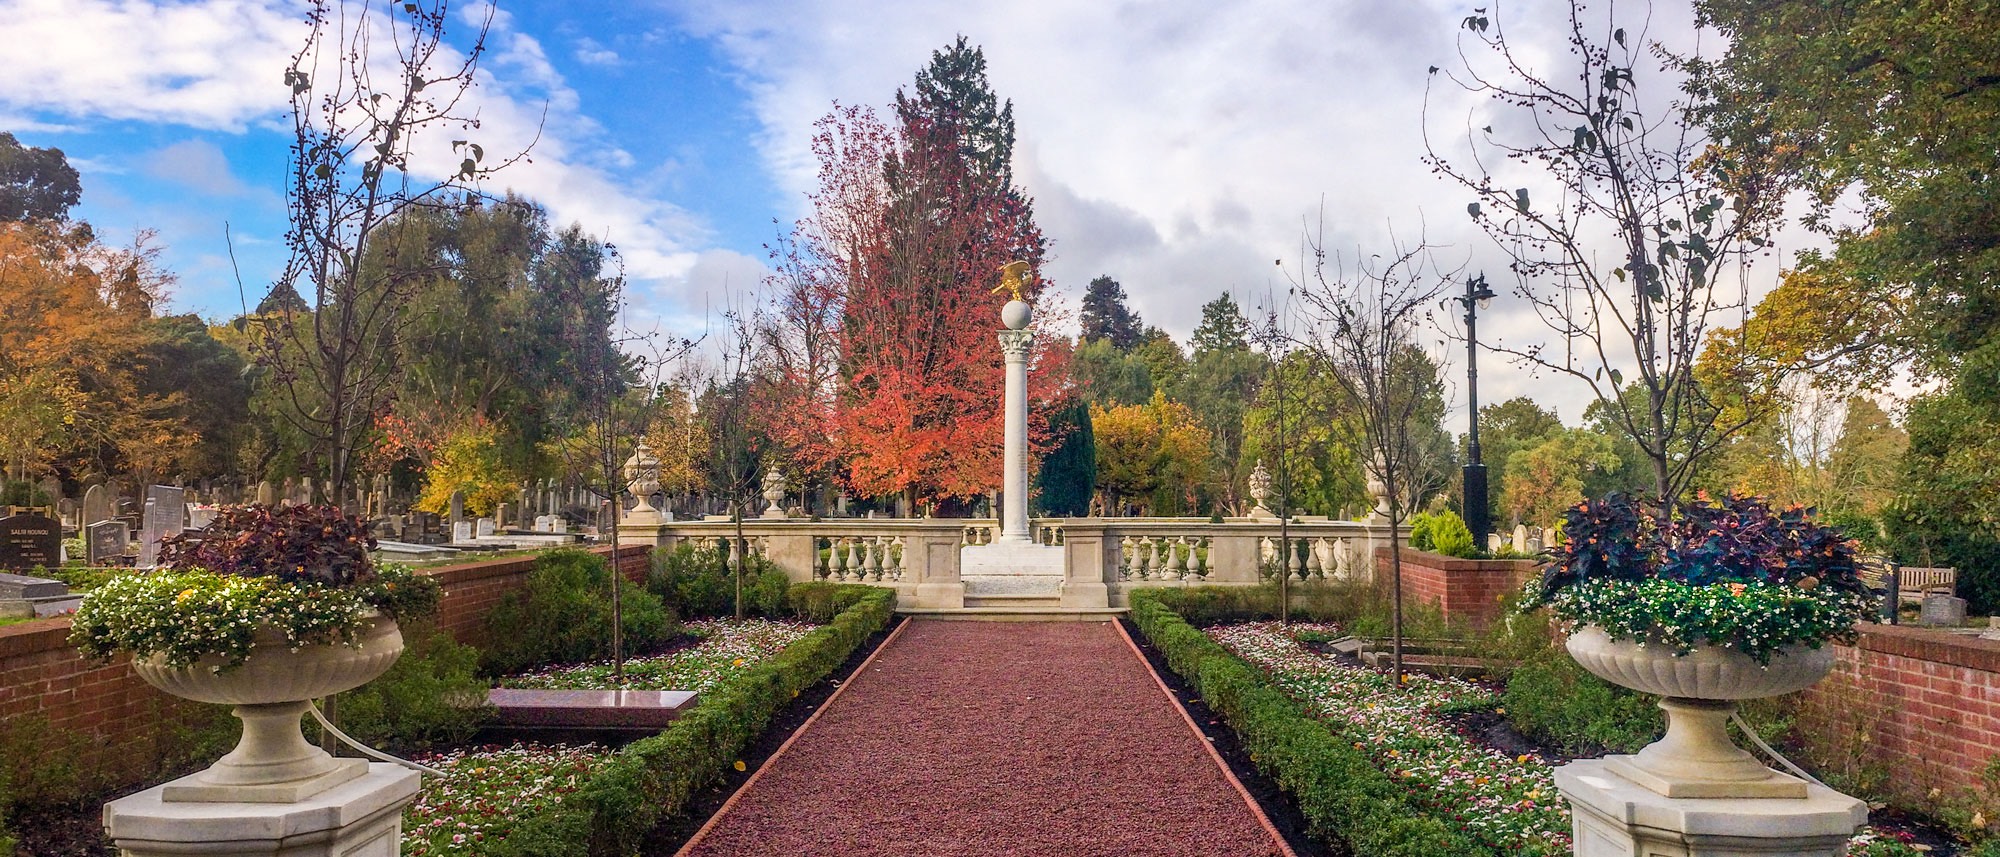 Shoghi Effendi's resting place in London at the New Southgate Cemetery